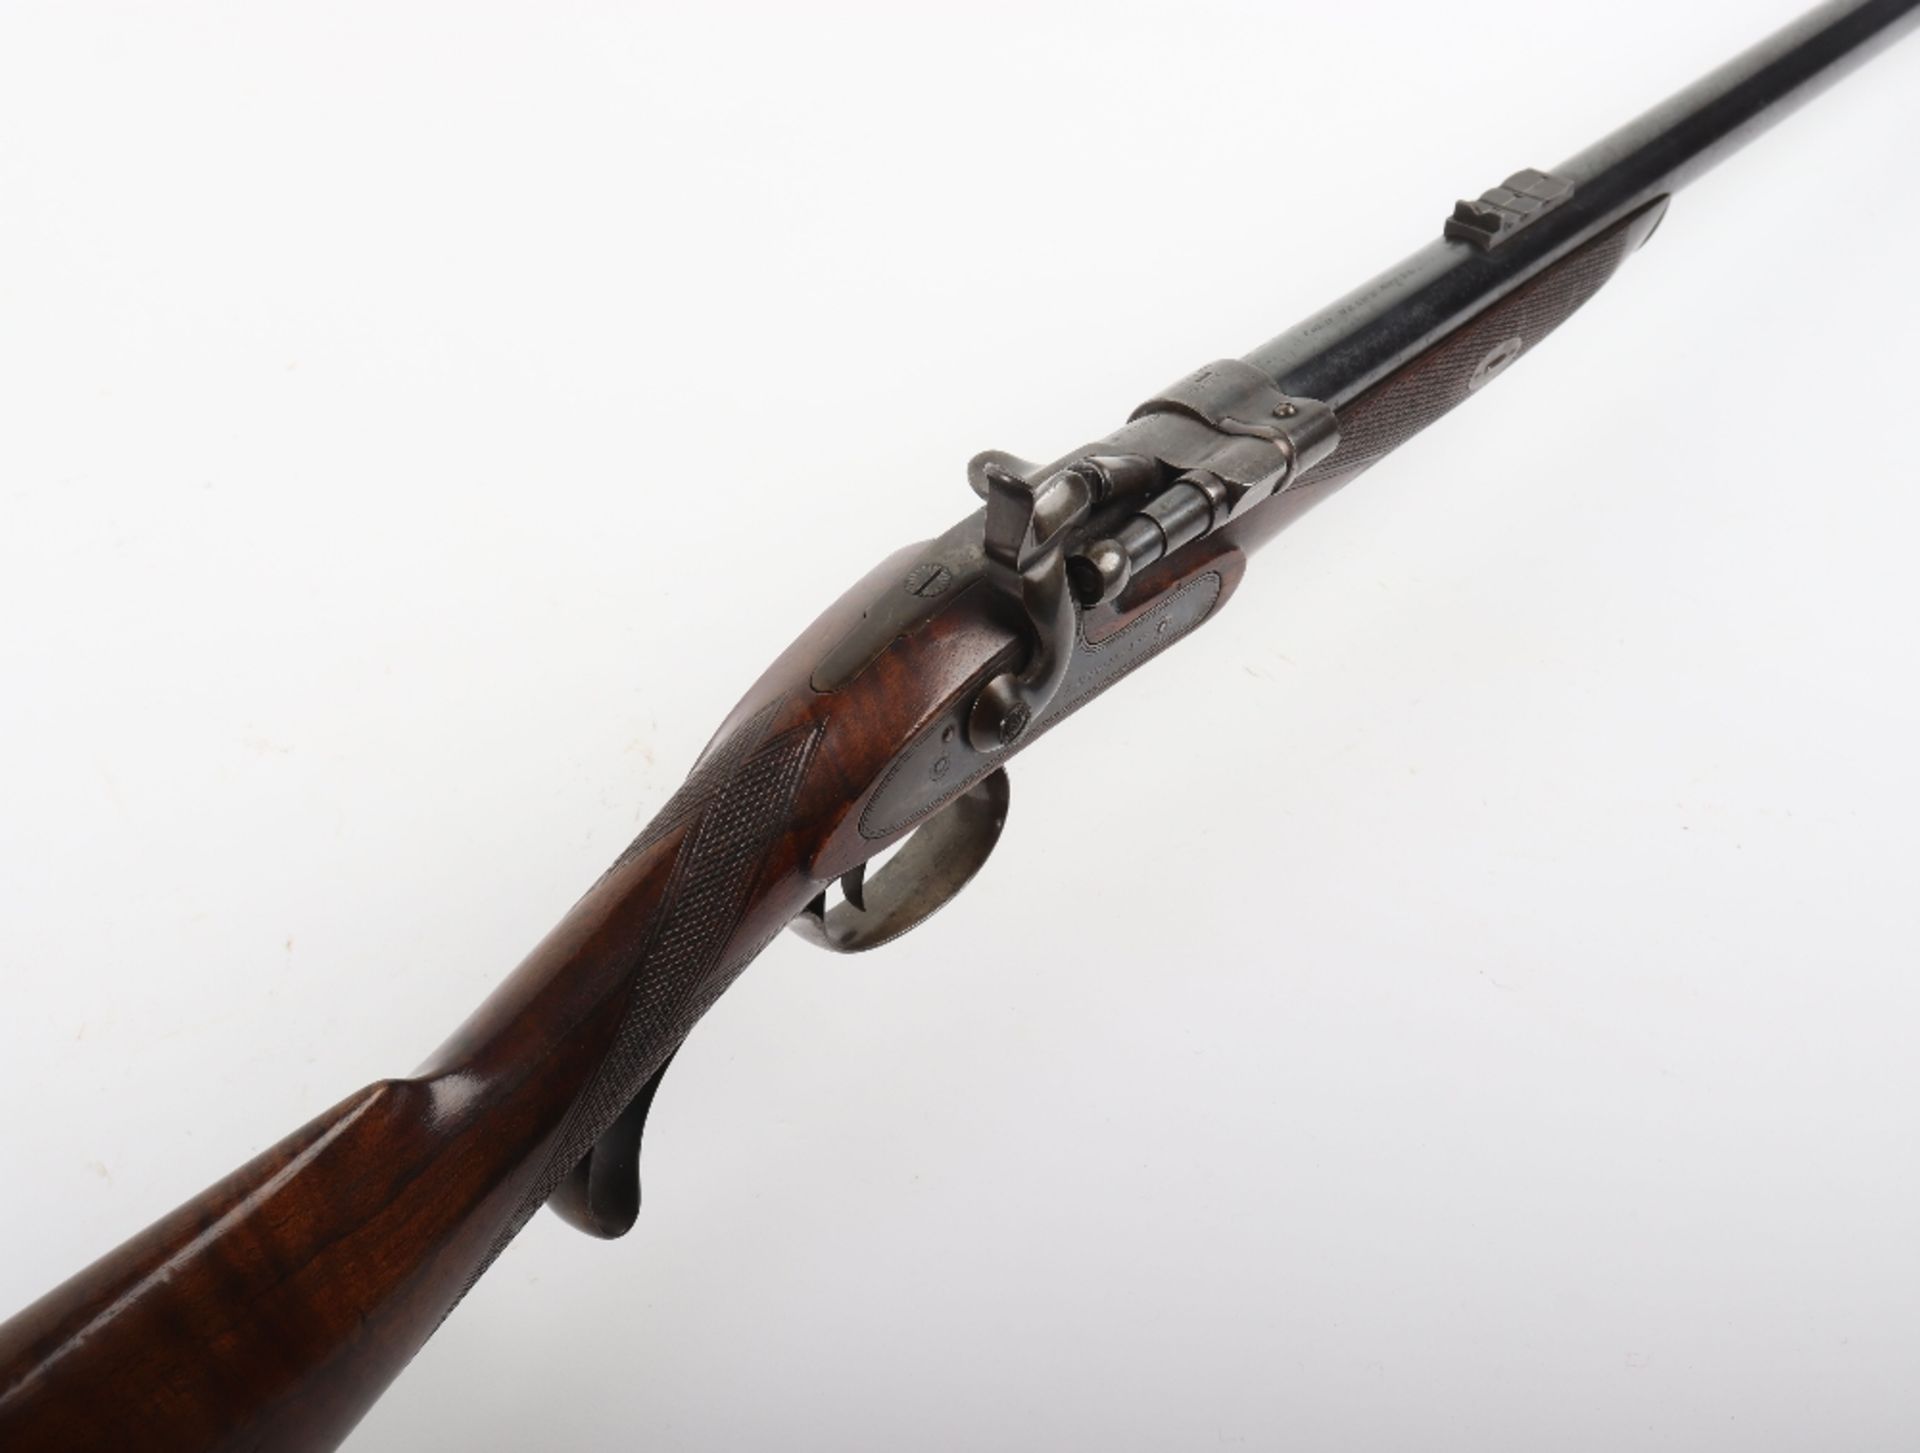 25-Bore Snider Action Breech Loading Sporting Rifle by Reilly No. 15227 - Image 9 of 14